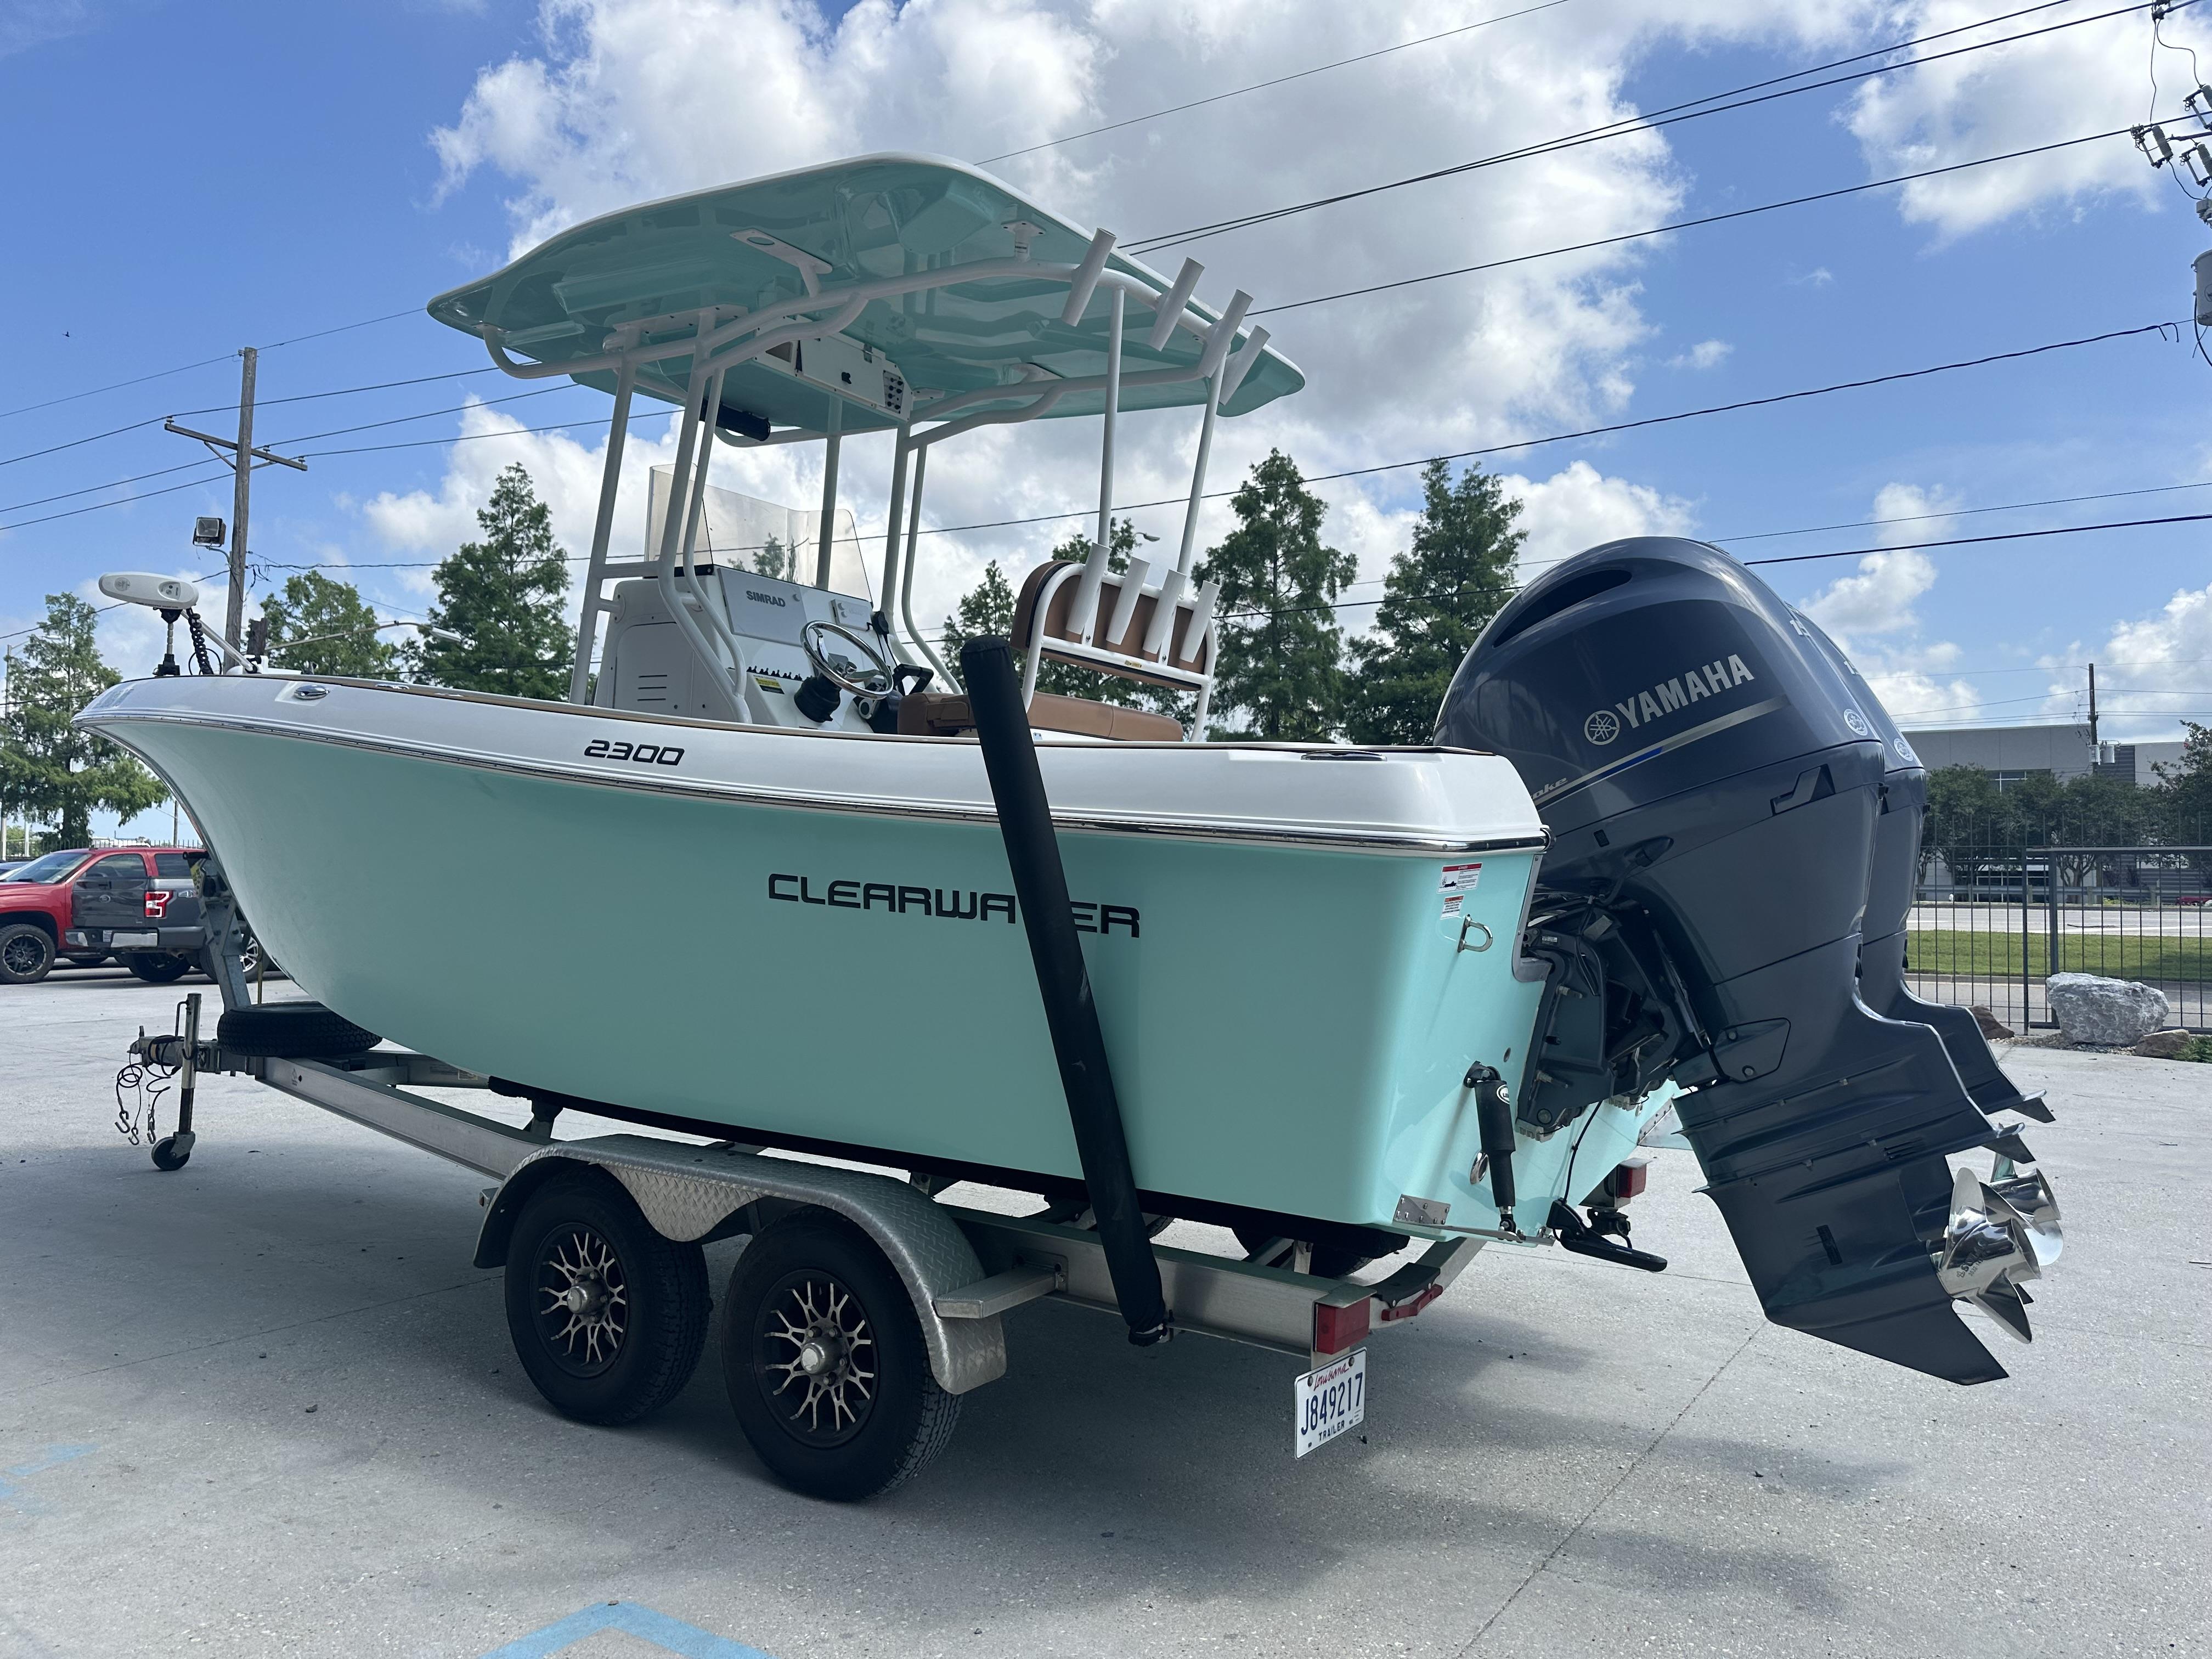 2019 Clearwater 2300